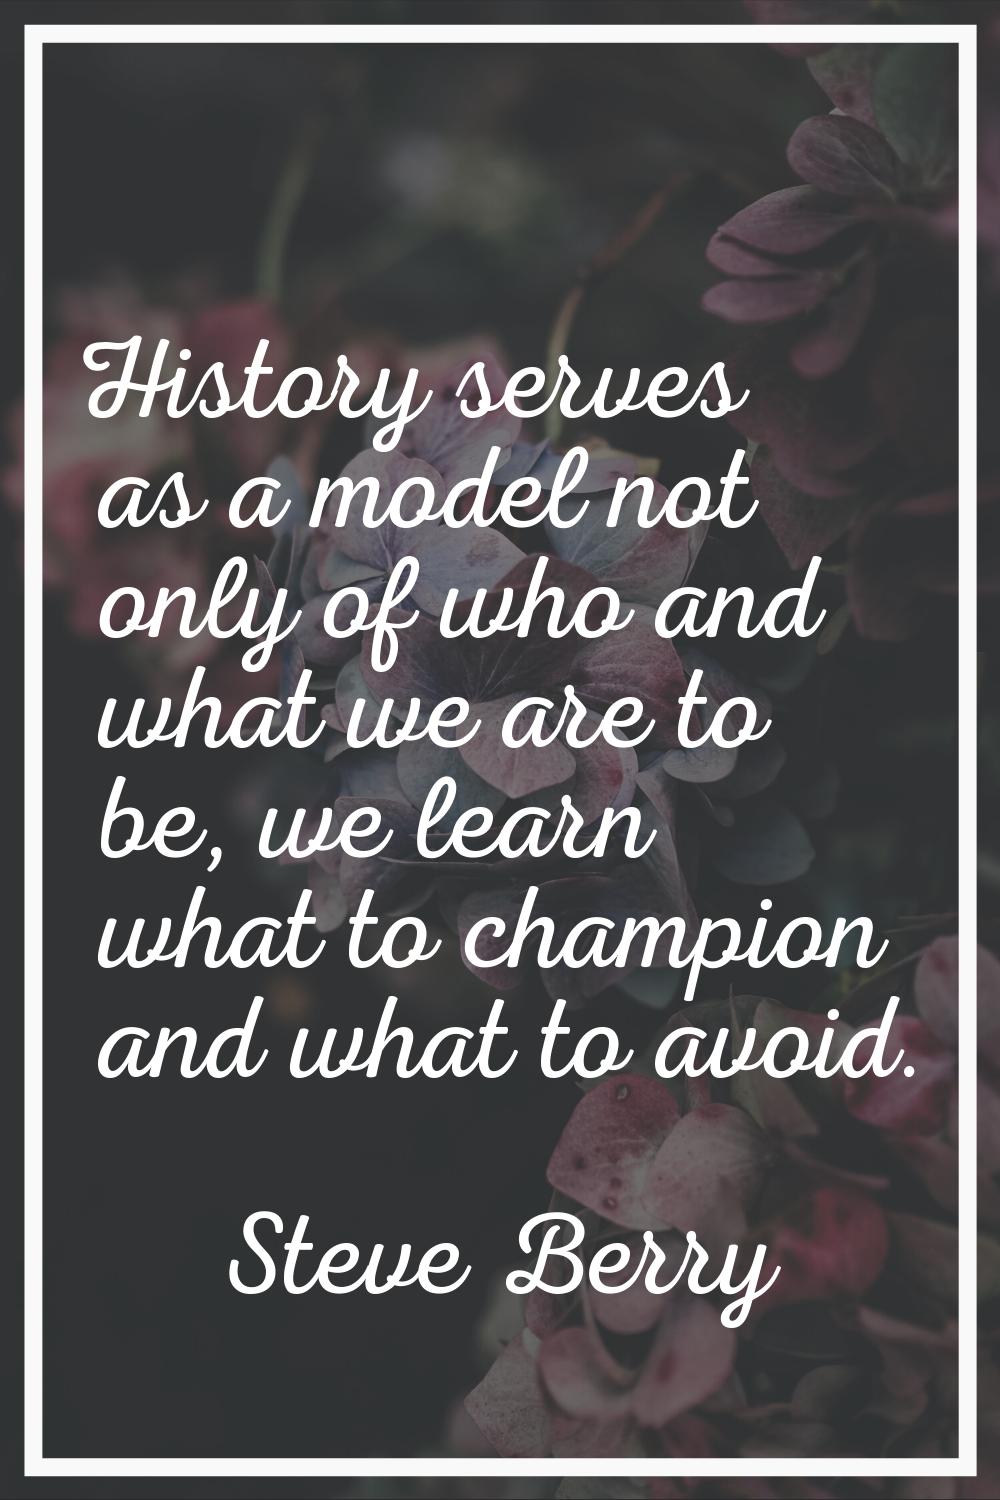 History serves as a model not only of who and what we are to be, we learn what to champion and what